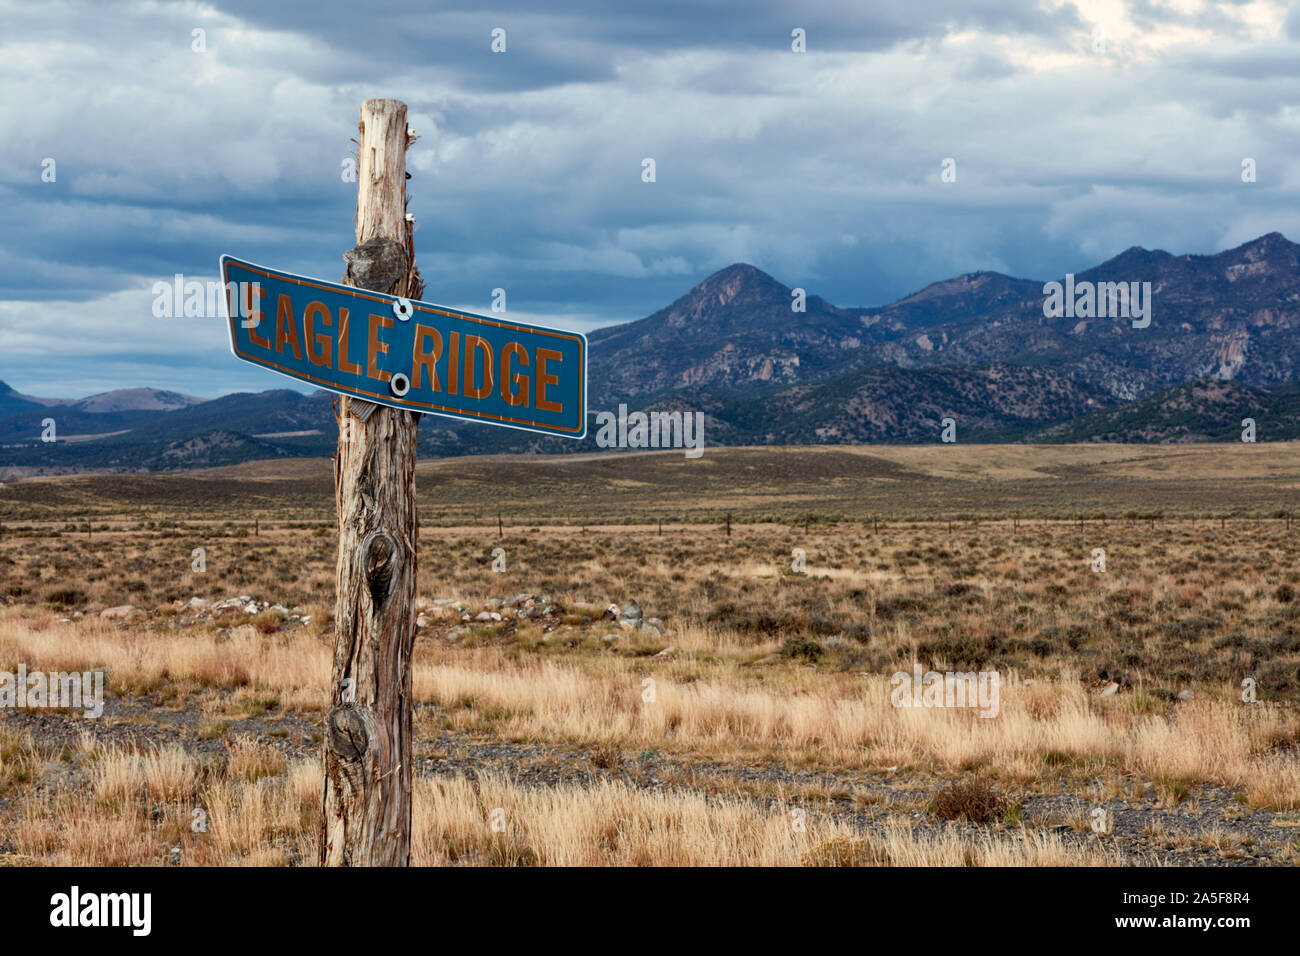 Signpost in a remote area of Utah Stock Photo